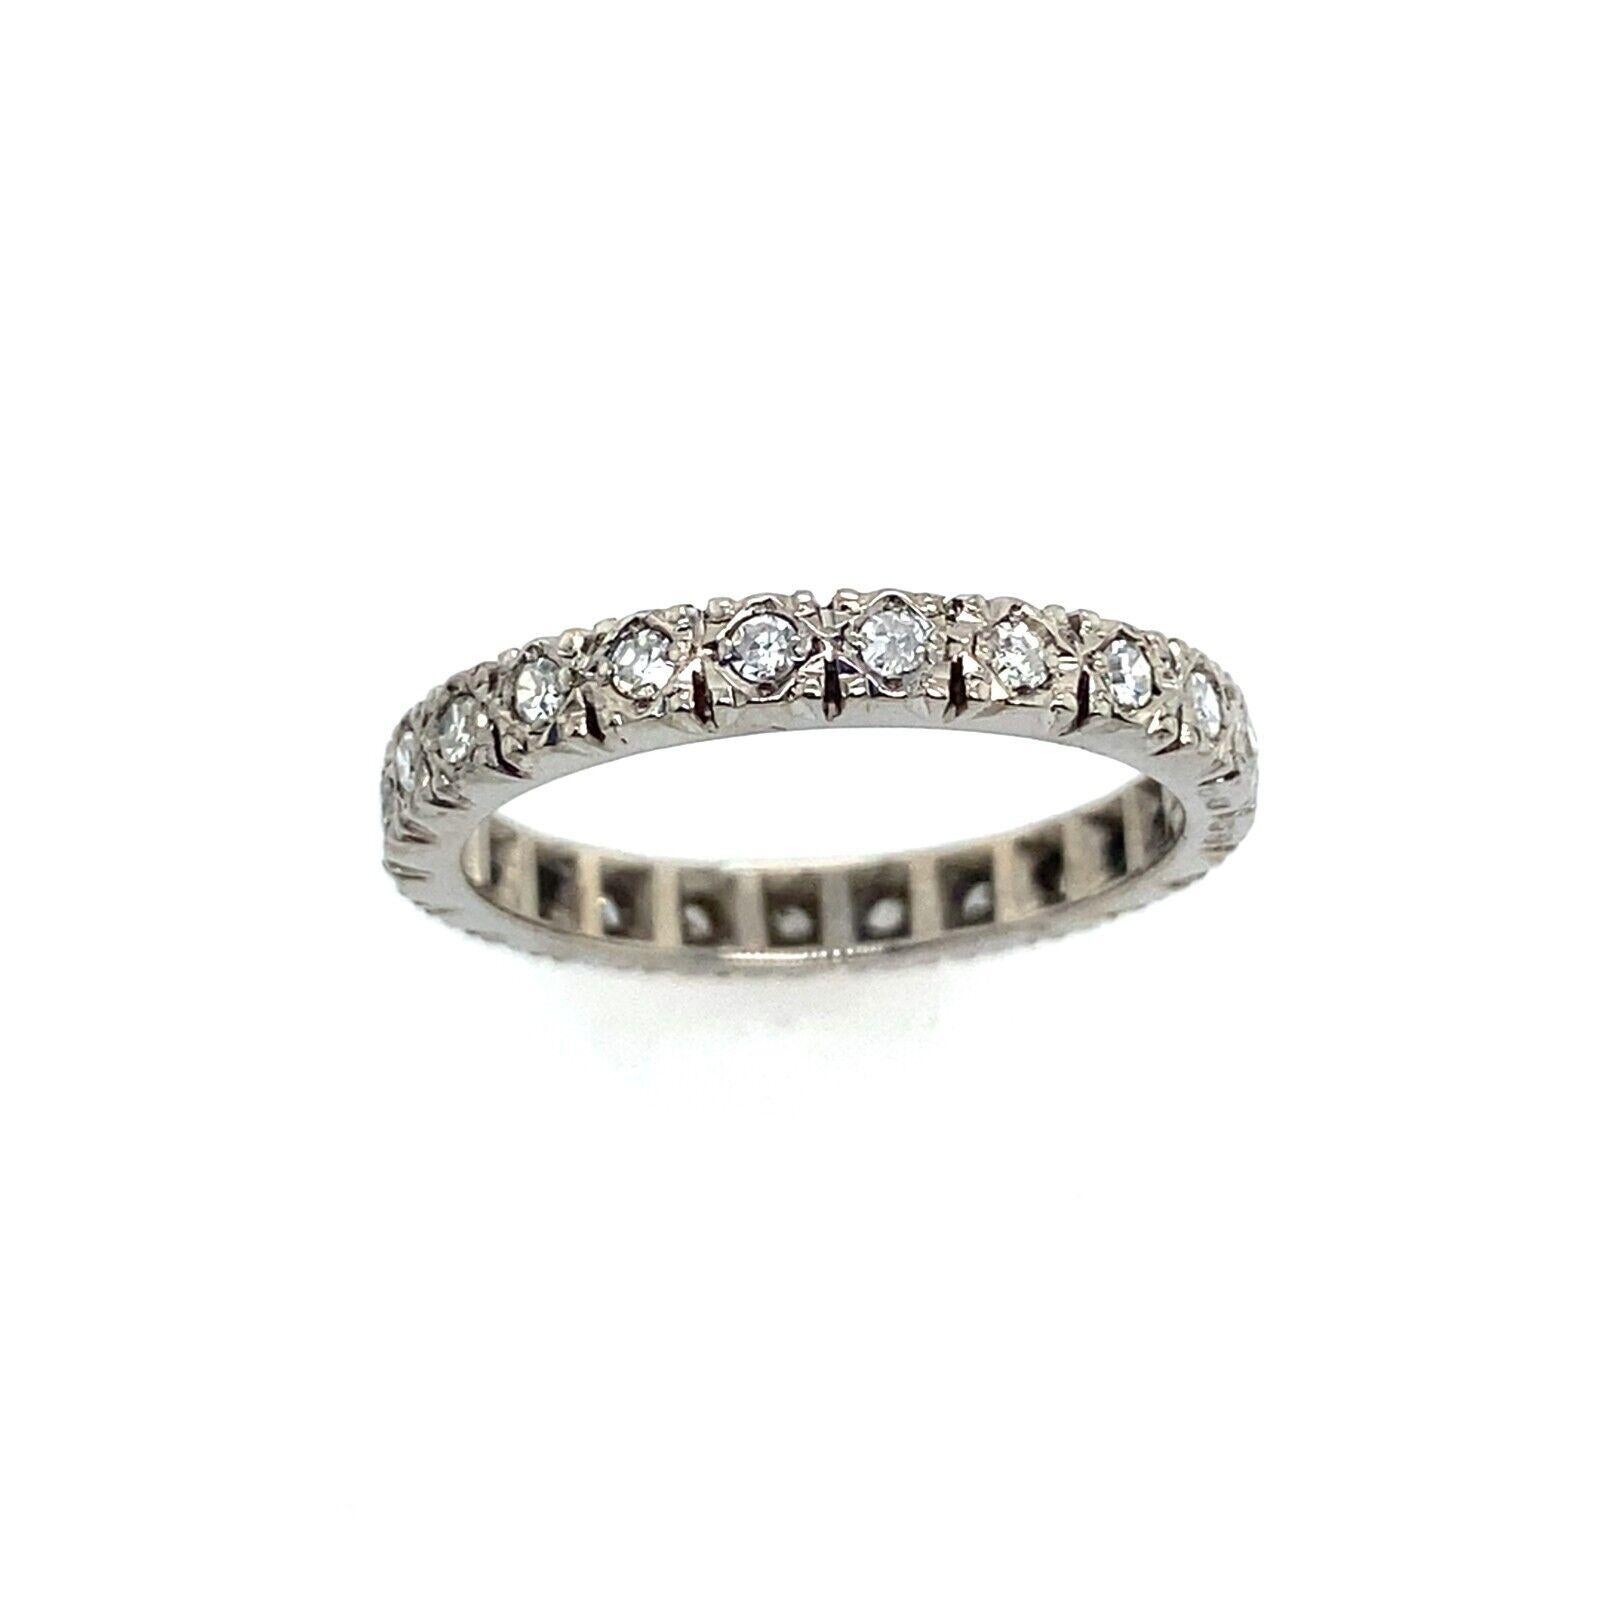 This beautiful 18ct White Gold eternity/wedding band is set with 0.65ct of Diamonds. The band has a total of 26 Diamonds set in delicate vintage setting. It is a perfect choice for stacking with other rings or wearing on its own.

Additional